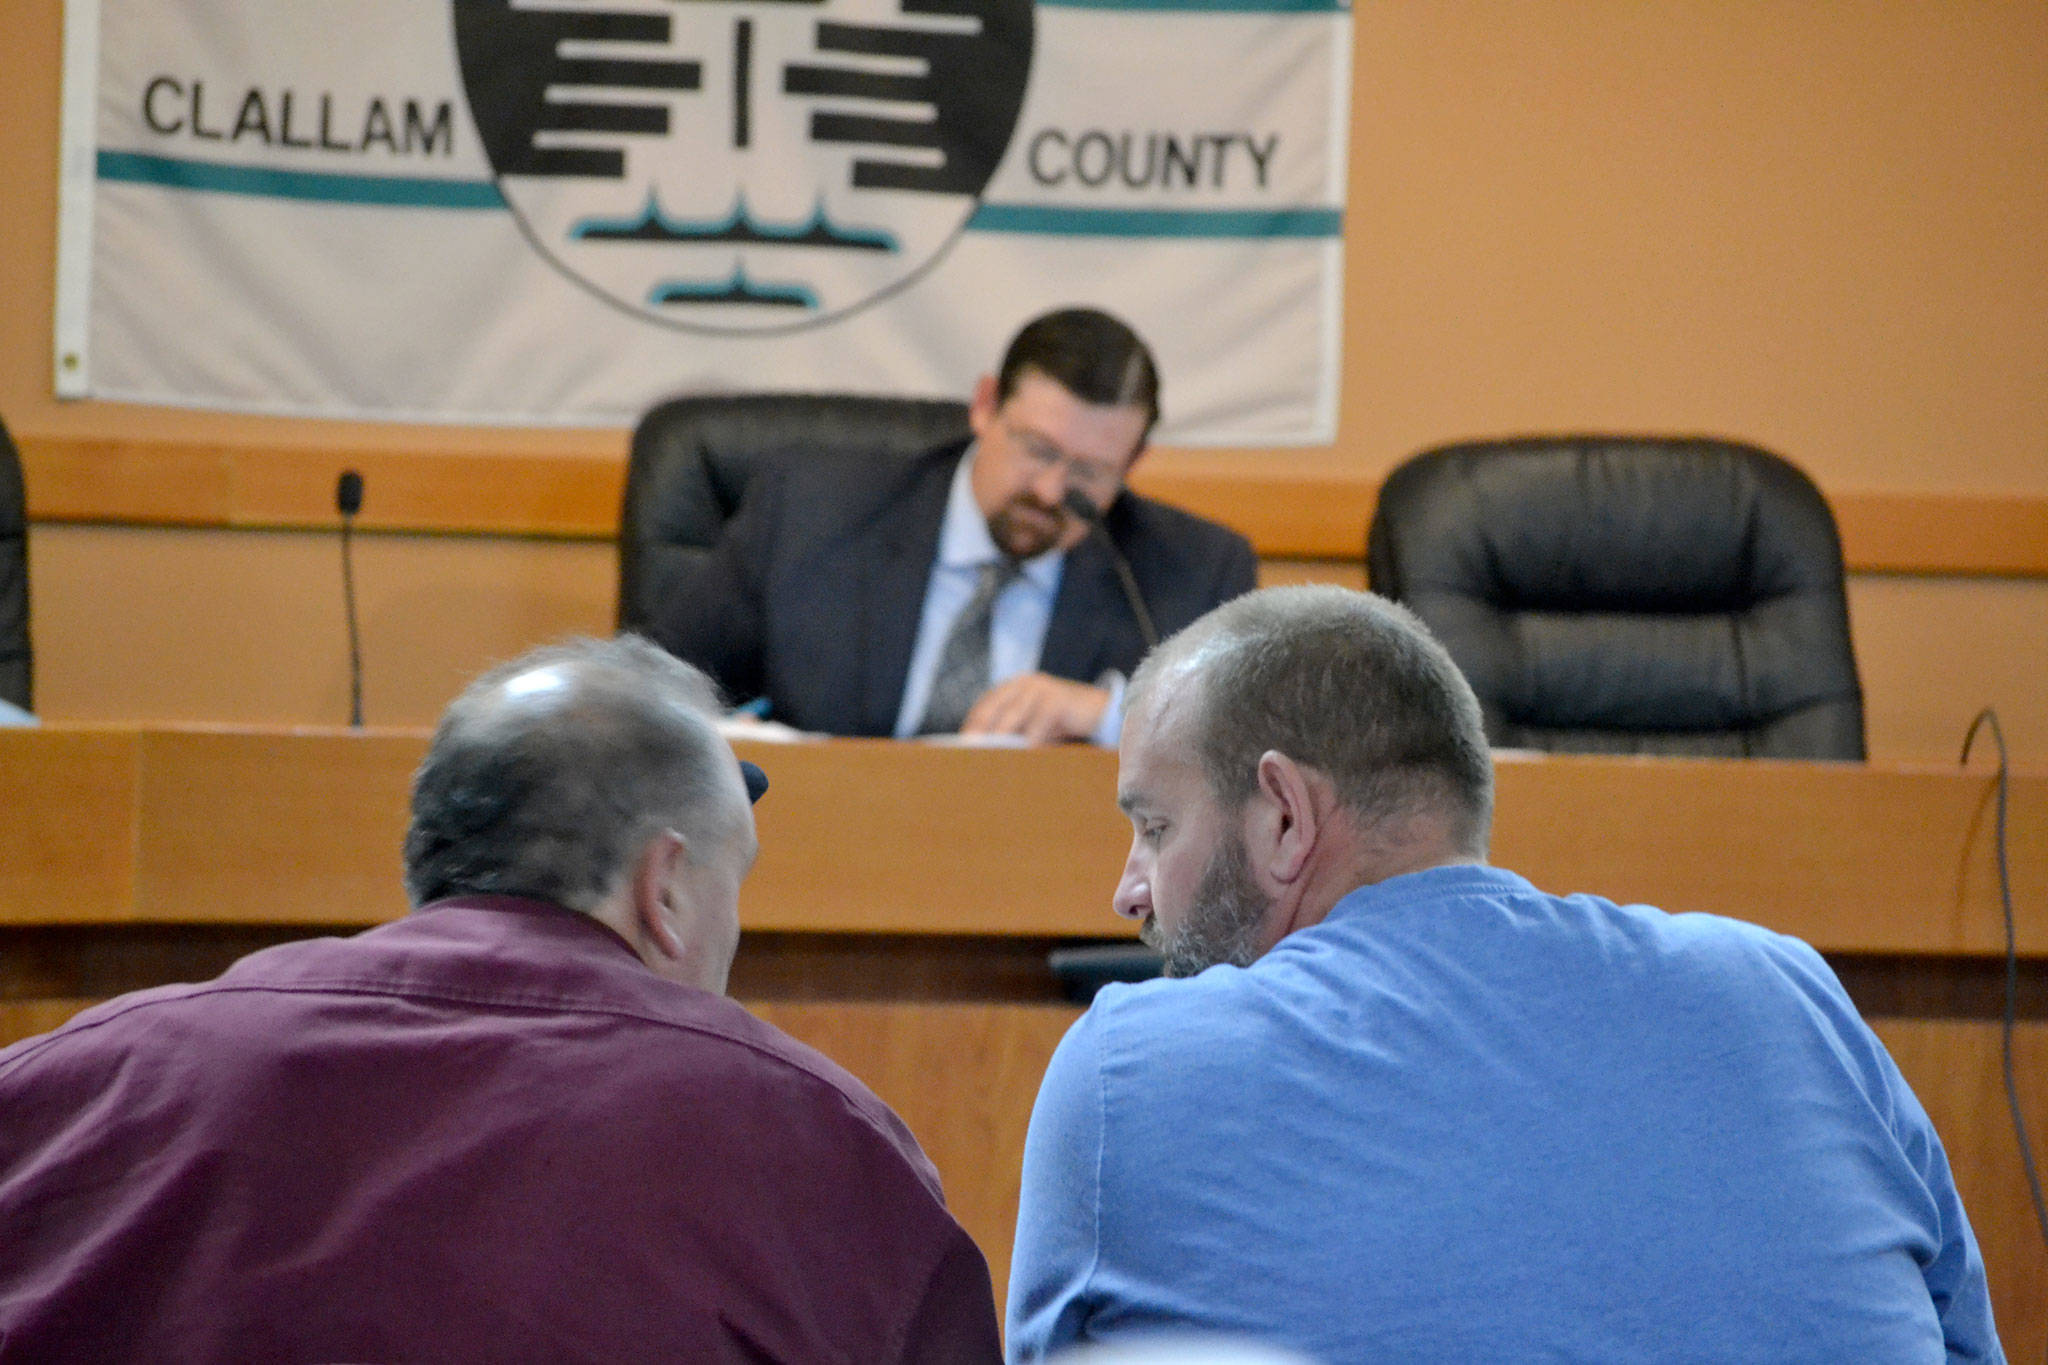 Tracy Gudgel of Zenovic & Associates Inc., left, and Chris Anderson of CA Homes Inc., right, confer during a hearing on a proposal to build 73 manufactured homes in Carlsborg. (Matthew Nash/Olympic Peninsula News Group)